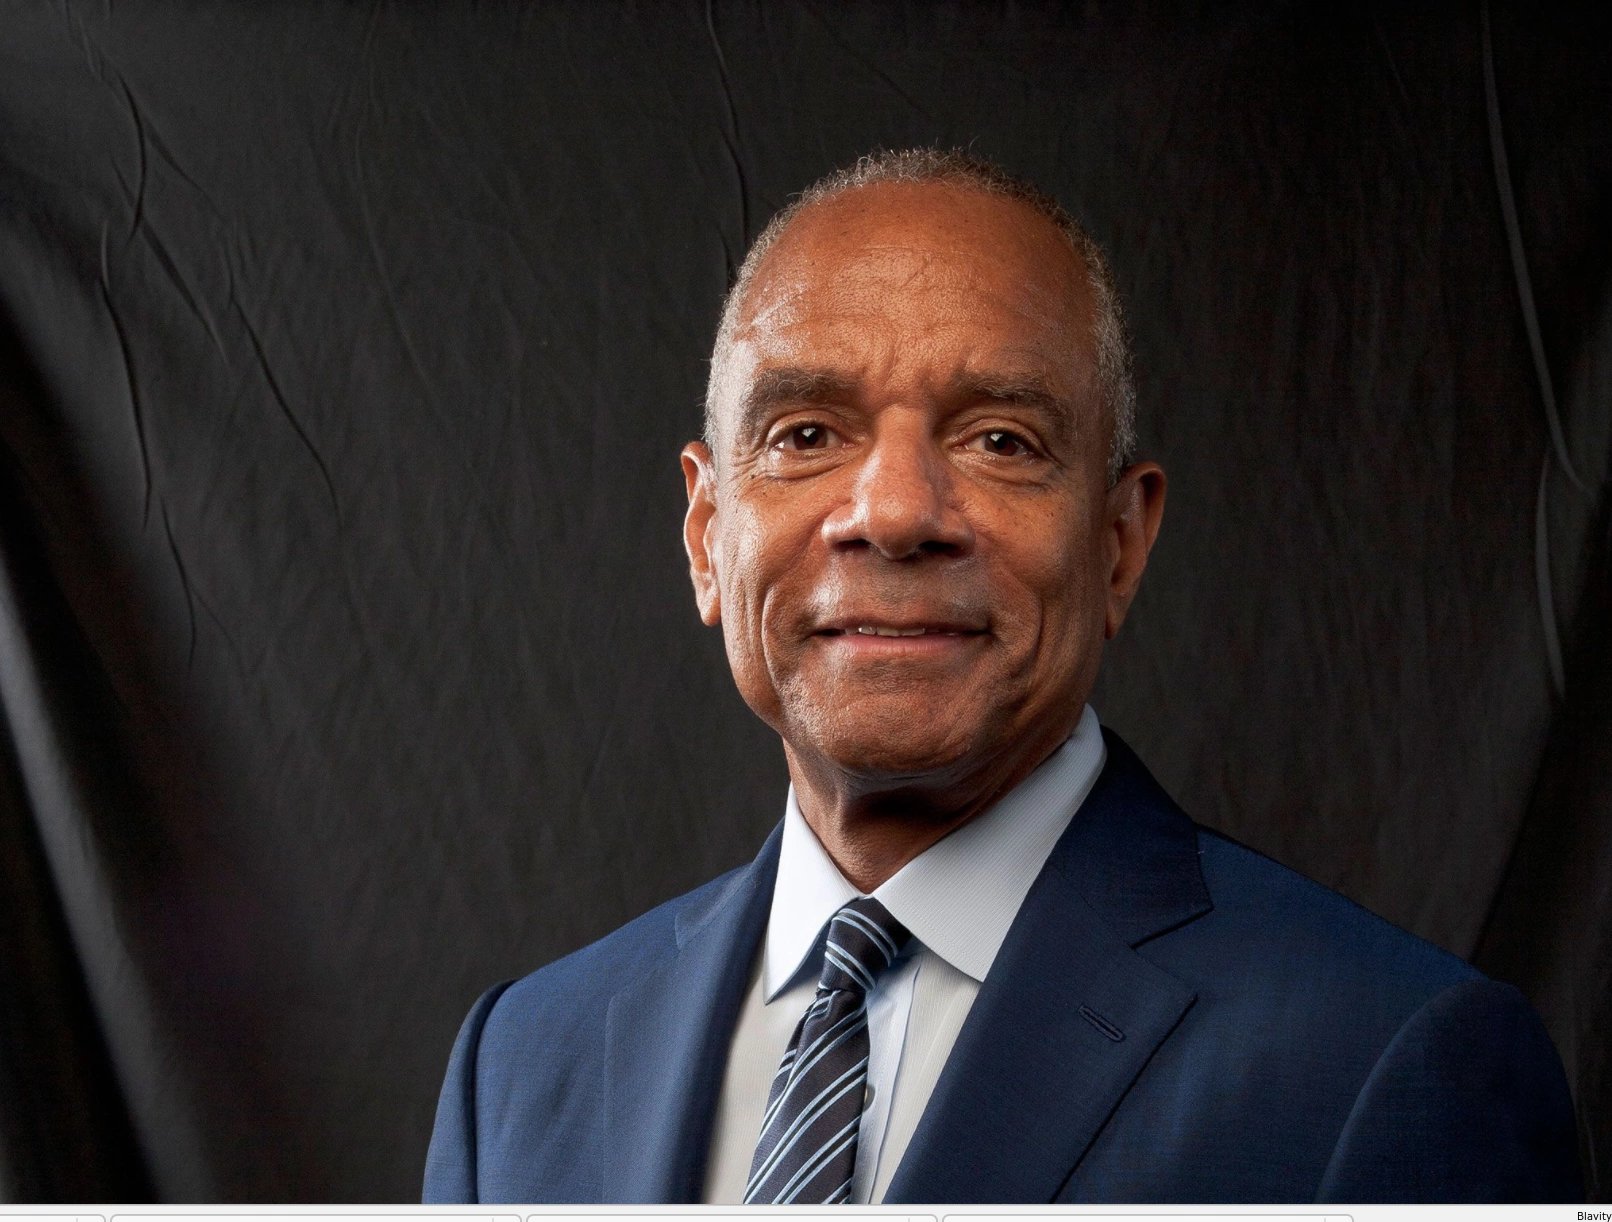 Facebook Welcomes Its First Black Board Member, American Express CEO Kenneth Chenault